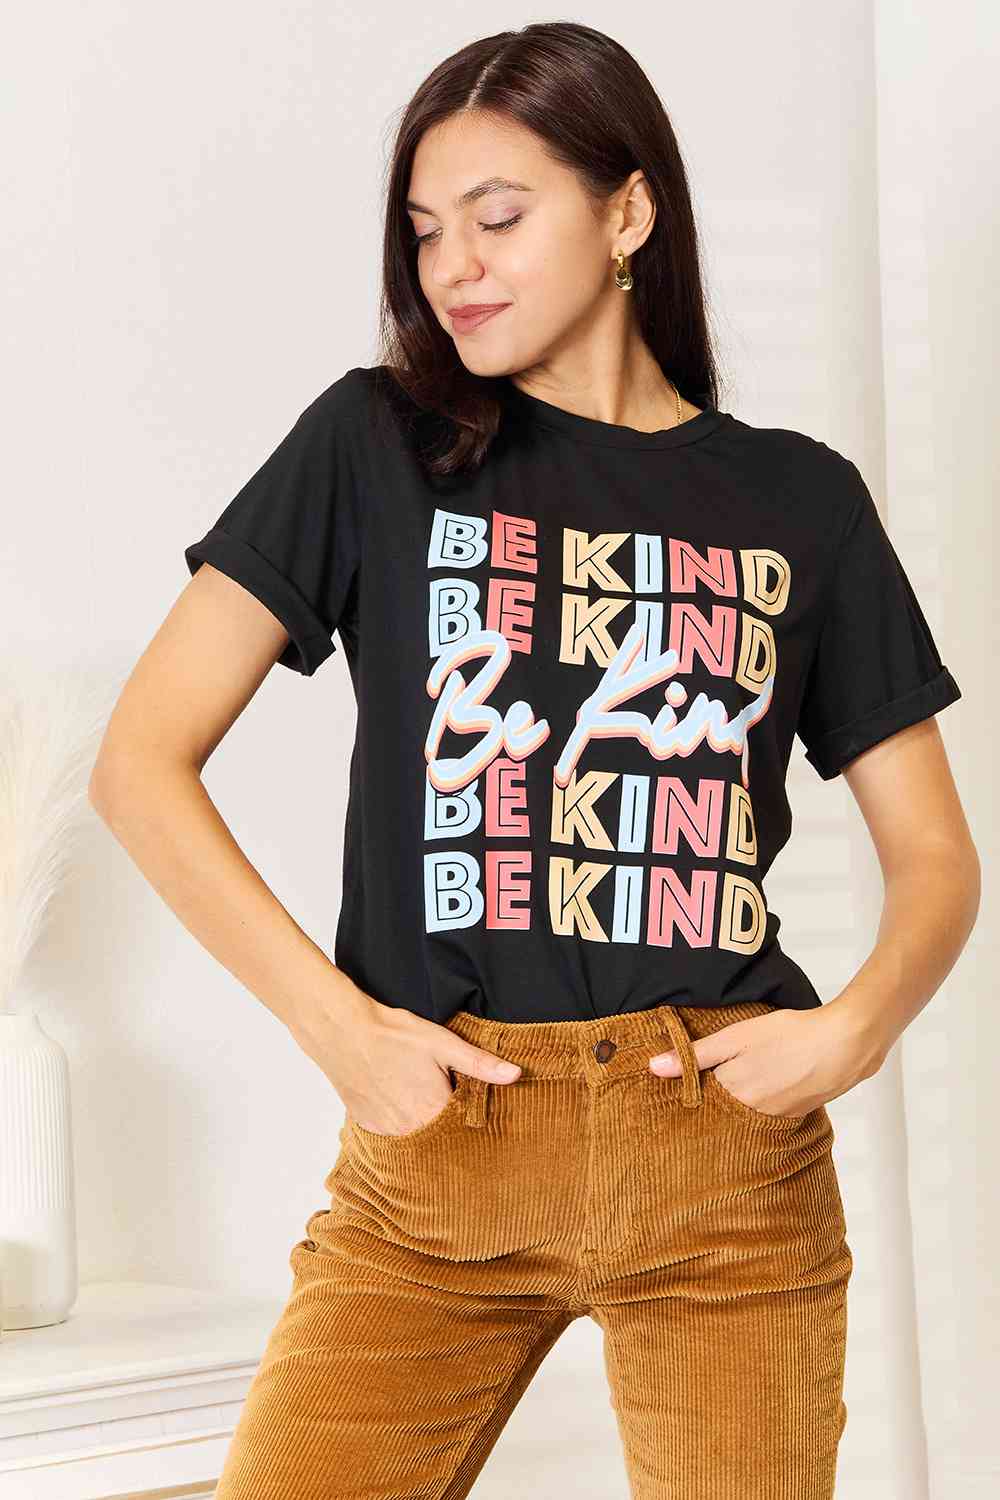 BE KIND Graphic Tee